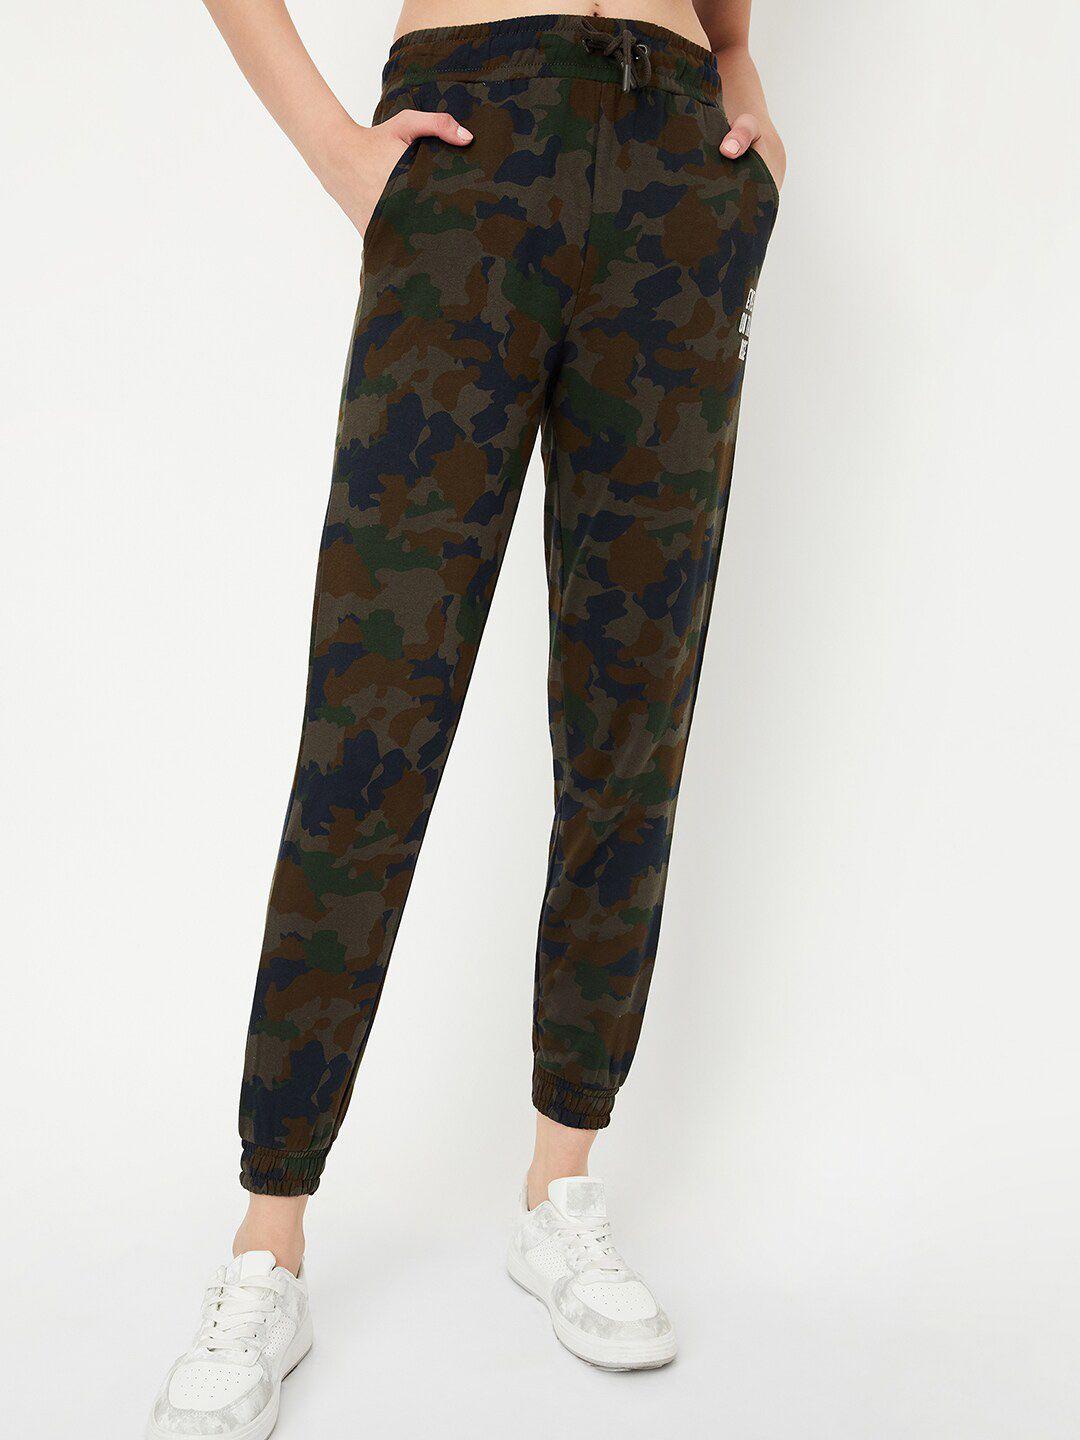 max-women-camouflage-printed-pure-cotton-gym-joggers